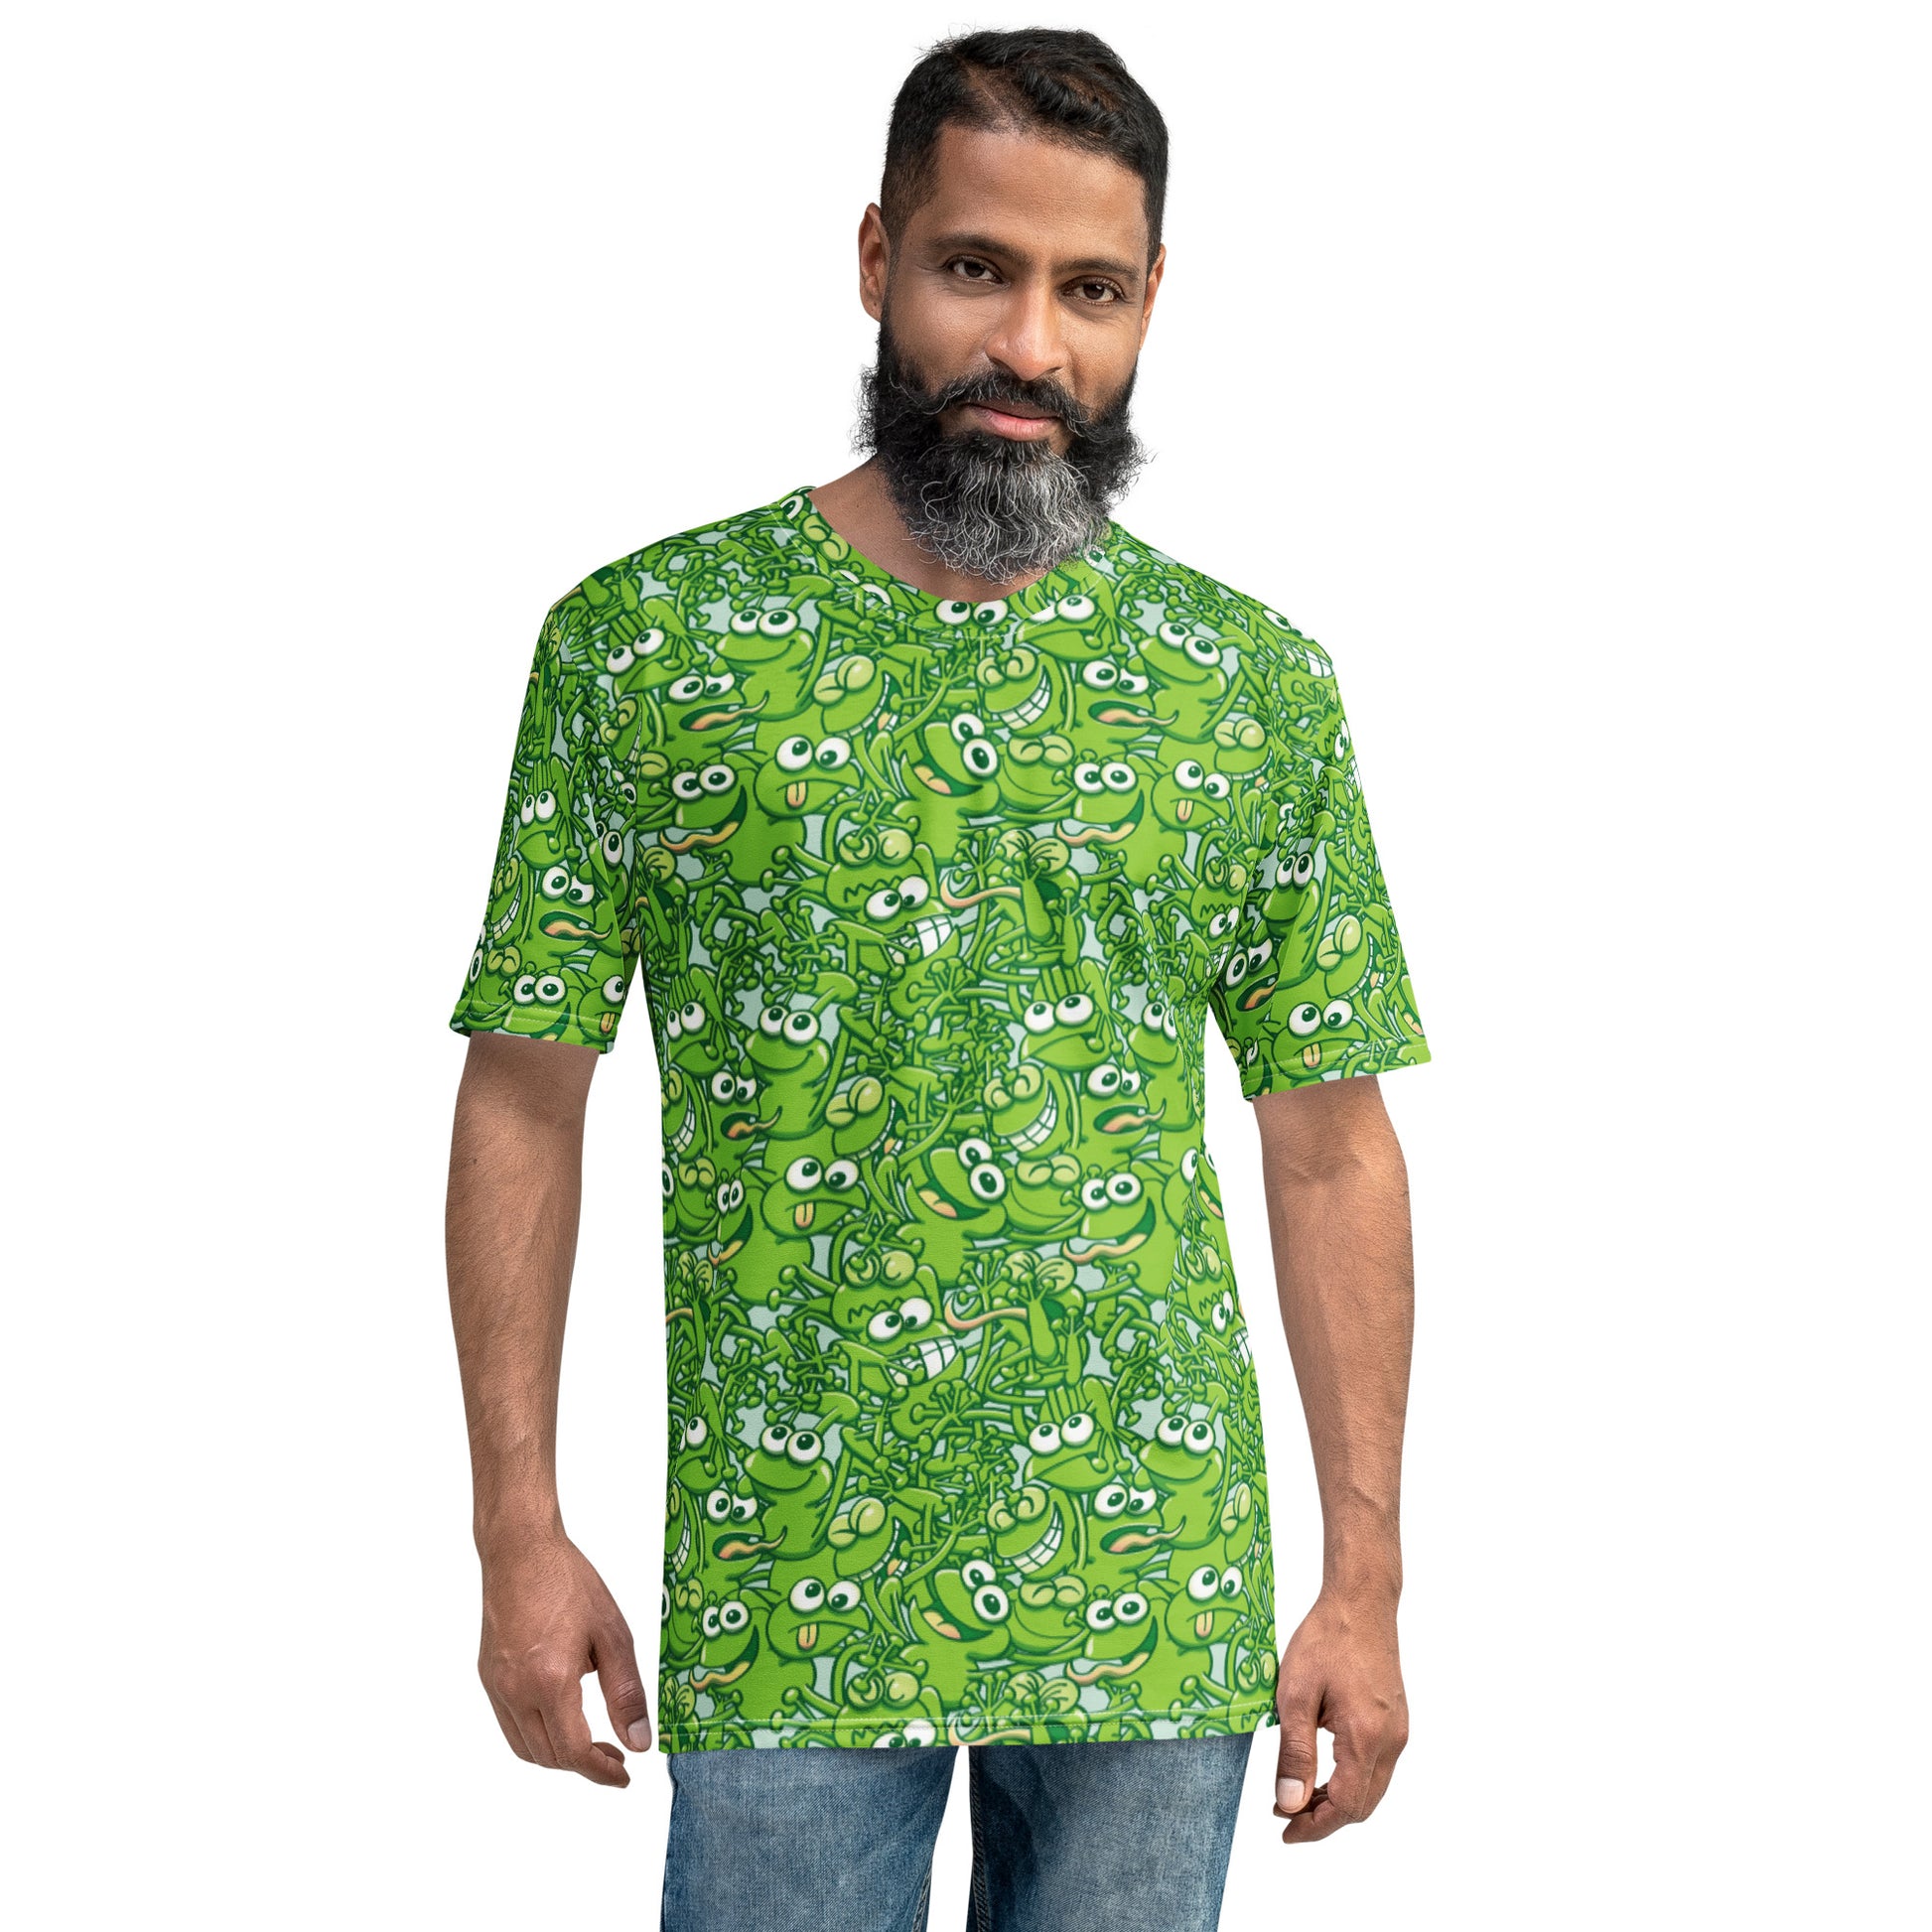 A tangled army of happy green frogs appears when the rain ends Men's t-shirt. Front view